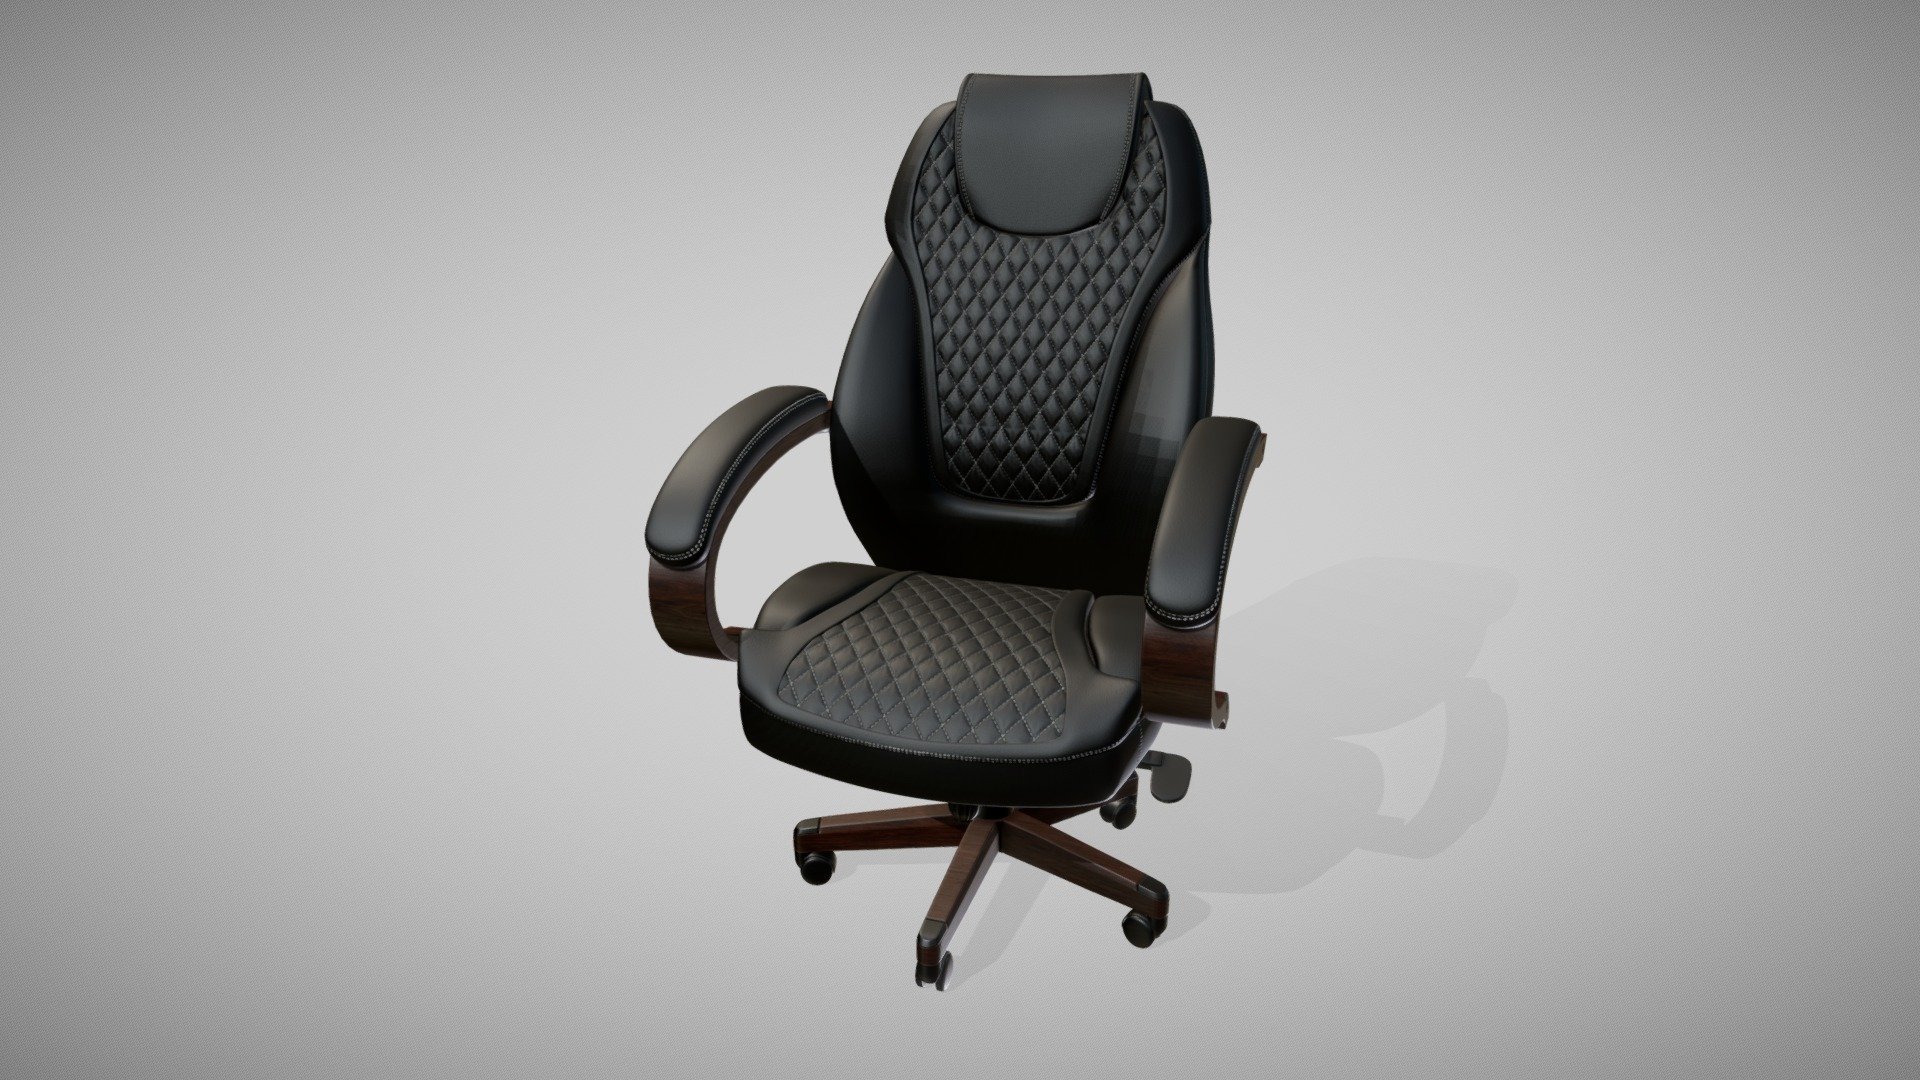 This is a high poly model of the Office chair. This was done with Blender.

The zip file includes same models in fbx, dae, blend, obj formats and textures.

The object is ready to use in your visualizations.

See my renderings and details here: https://www.behance.net/gallery/73885327/Chairs-%28Chairman%29 - Office chair - 3D model by Ekaterina (@kattynote) 3d model